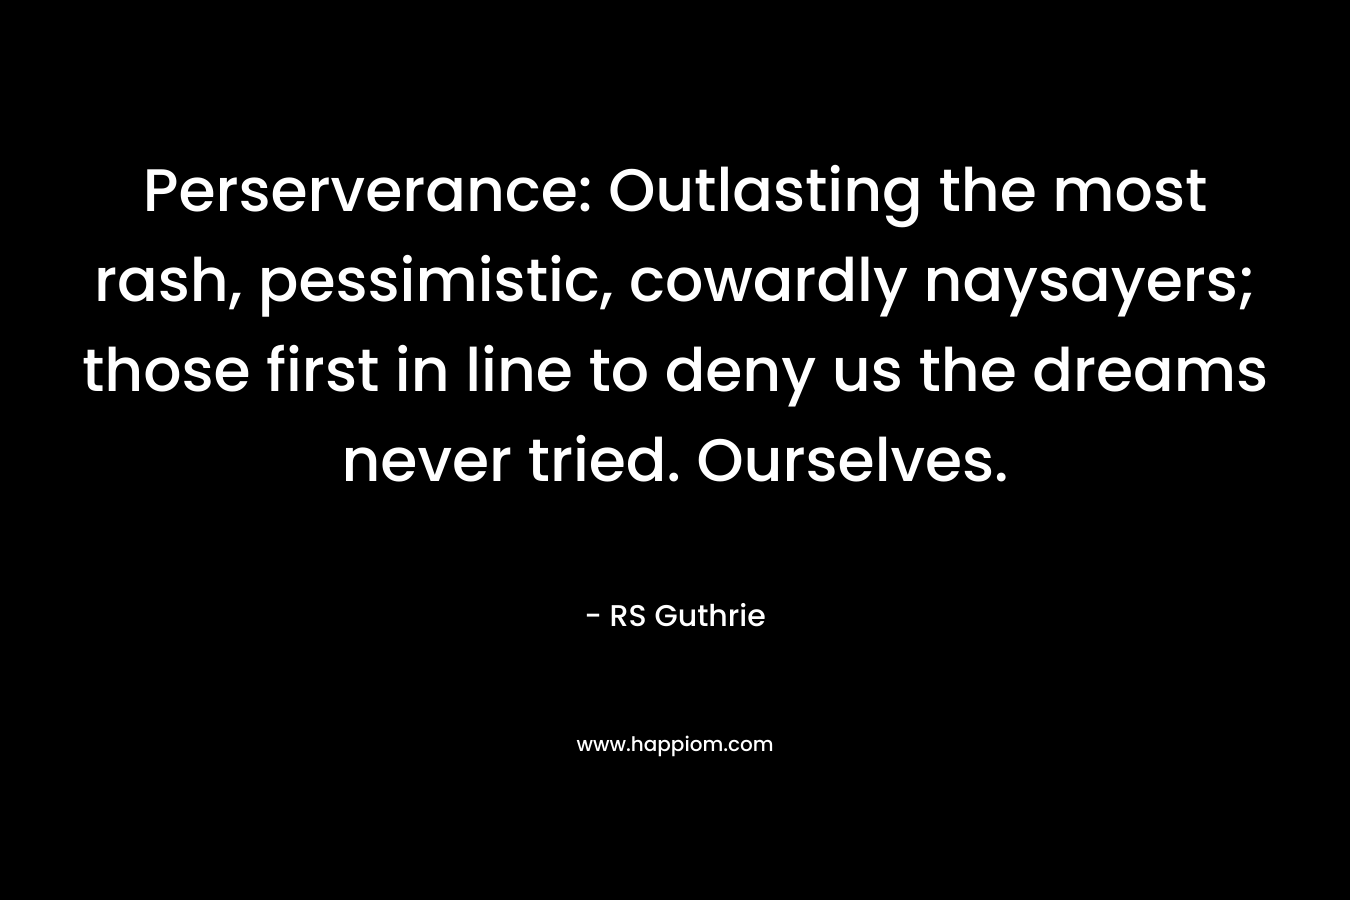 Perserverance: Outlasting the most rash, pessimistic, cowardly naysayers; those first in line to deny us the dreams never tried. Ourselves.